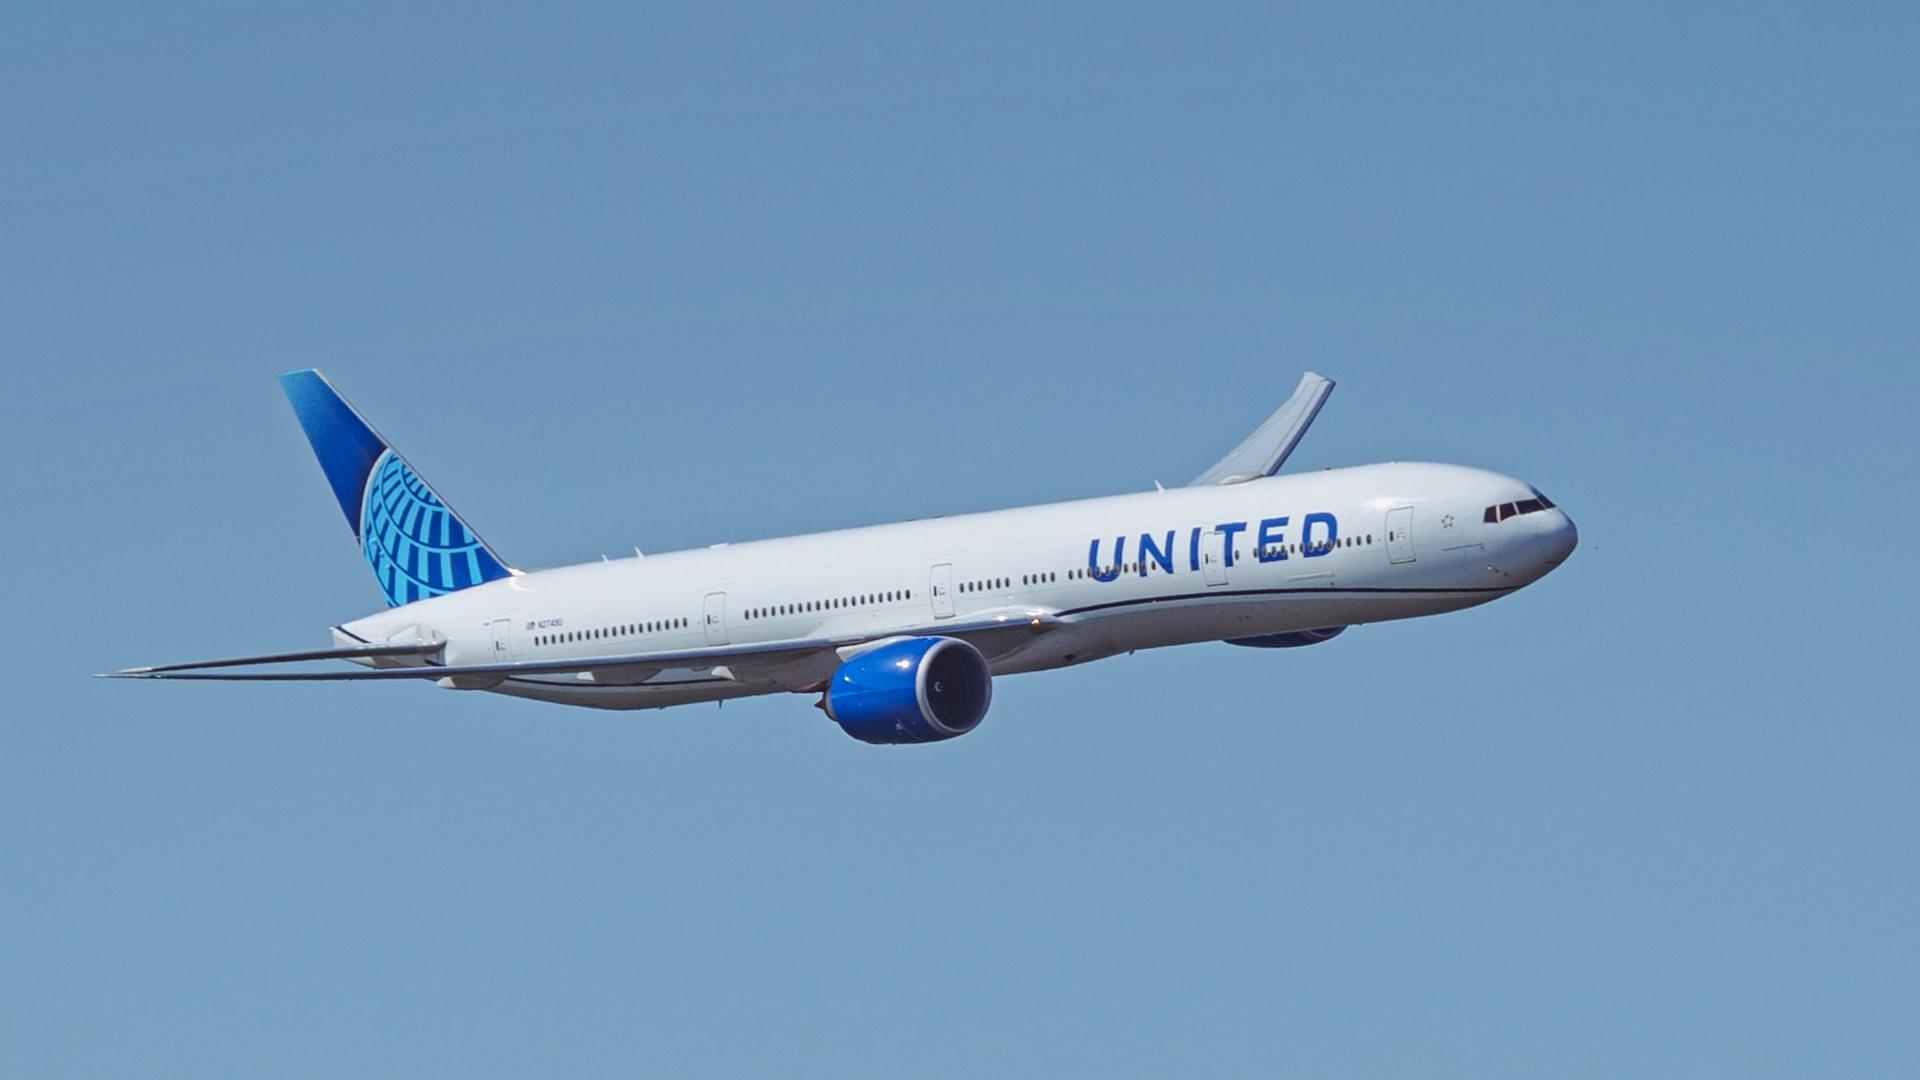 FAA Looking Closely At United Airlines After Recent Incidents